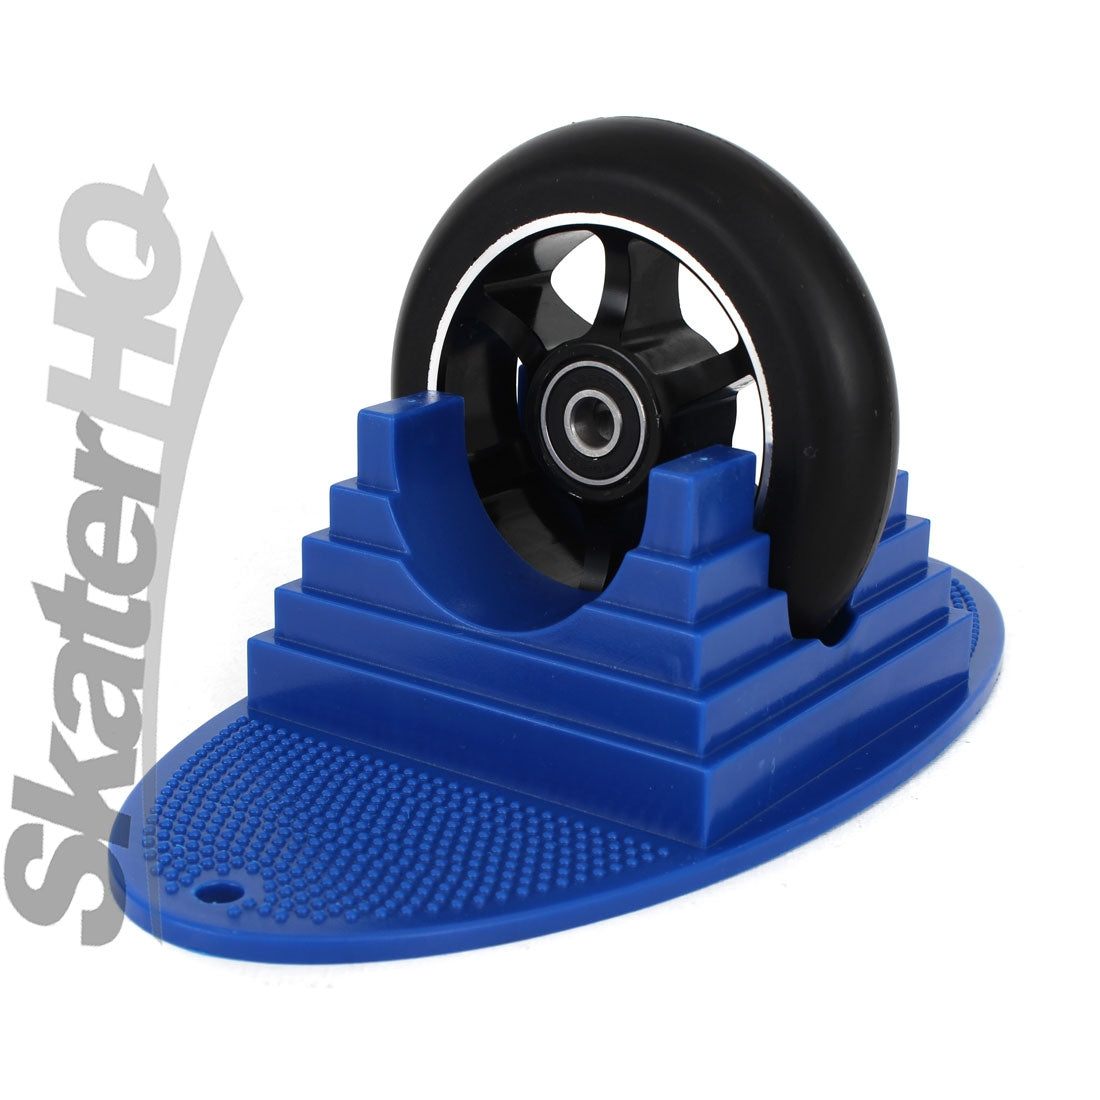 Scooter Pyramid Stand - Blue Scooter Accessories